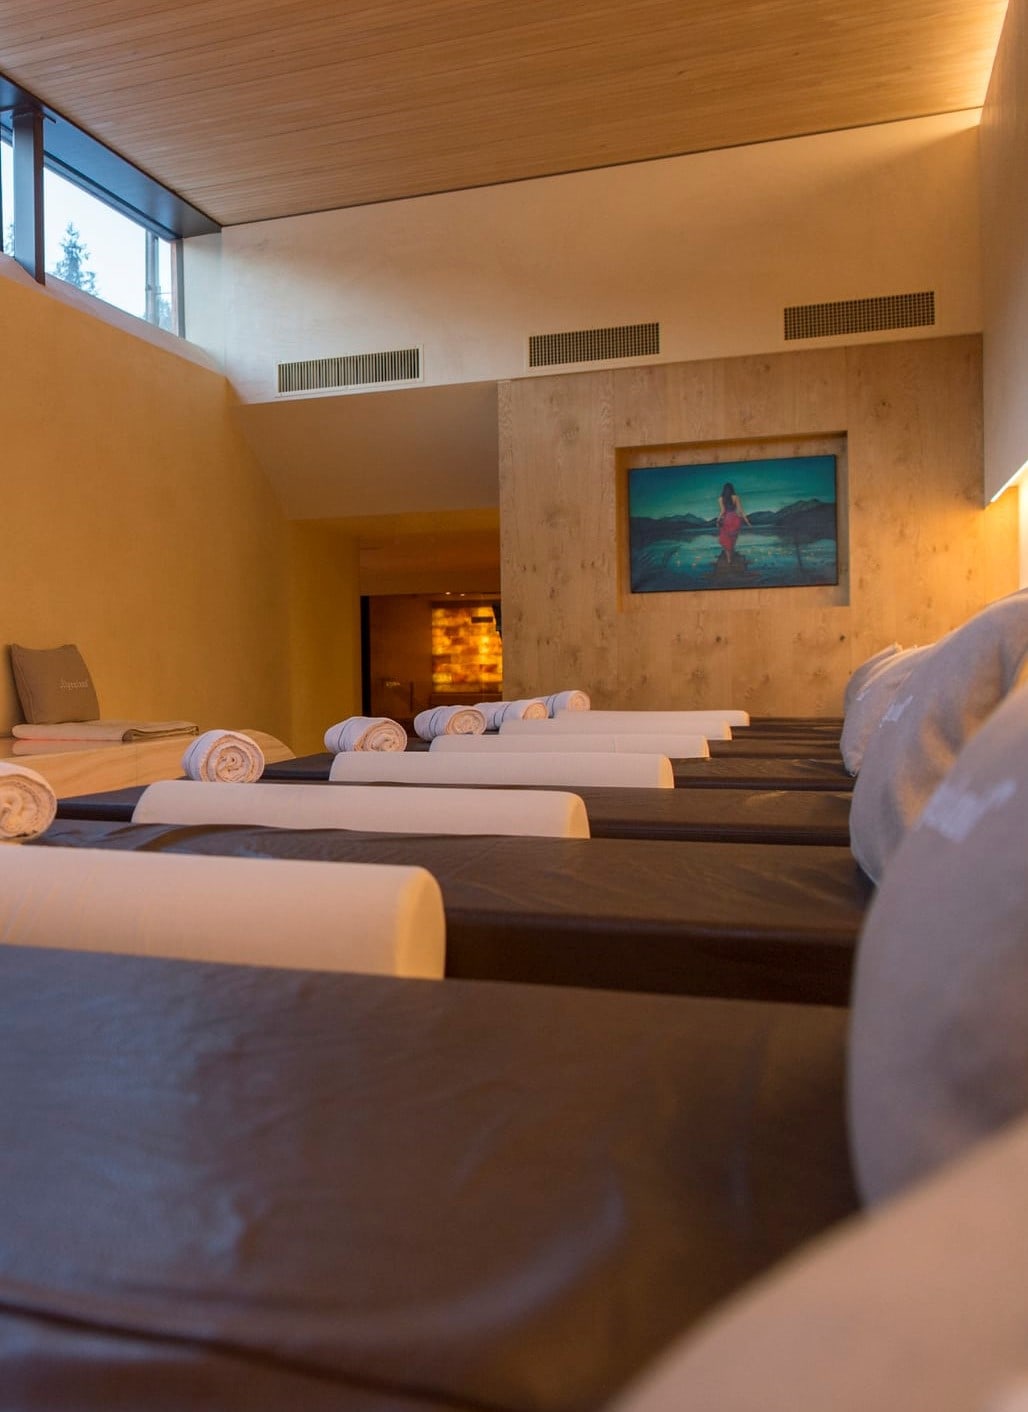 A row of several hotel spa beds all set within a modern spa.